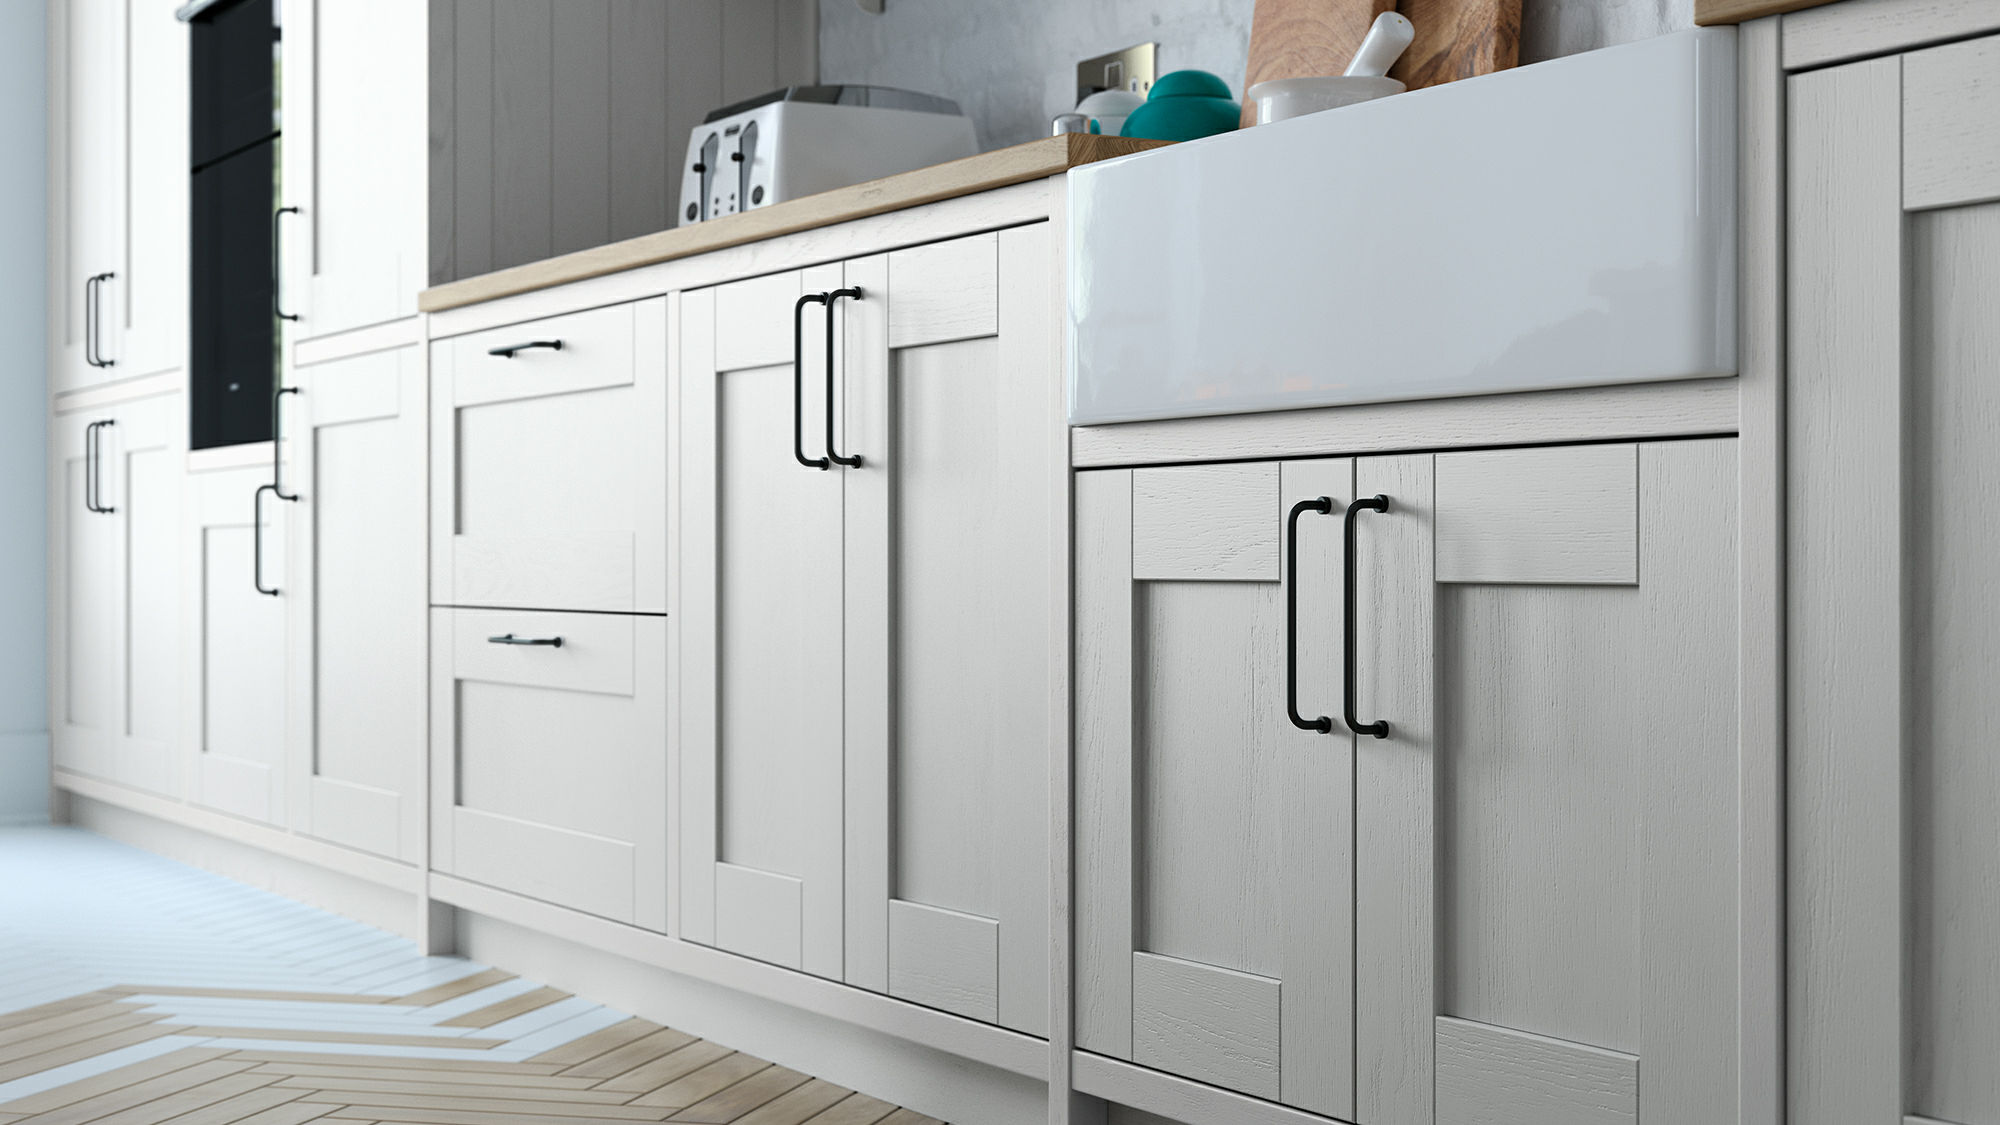 Madison solid wood light grey kitchens offering robust construction and a sleek, light grey hue